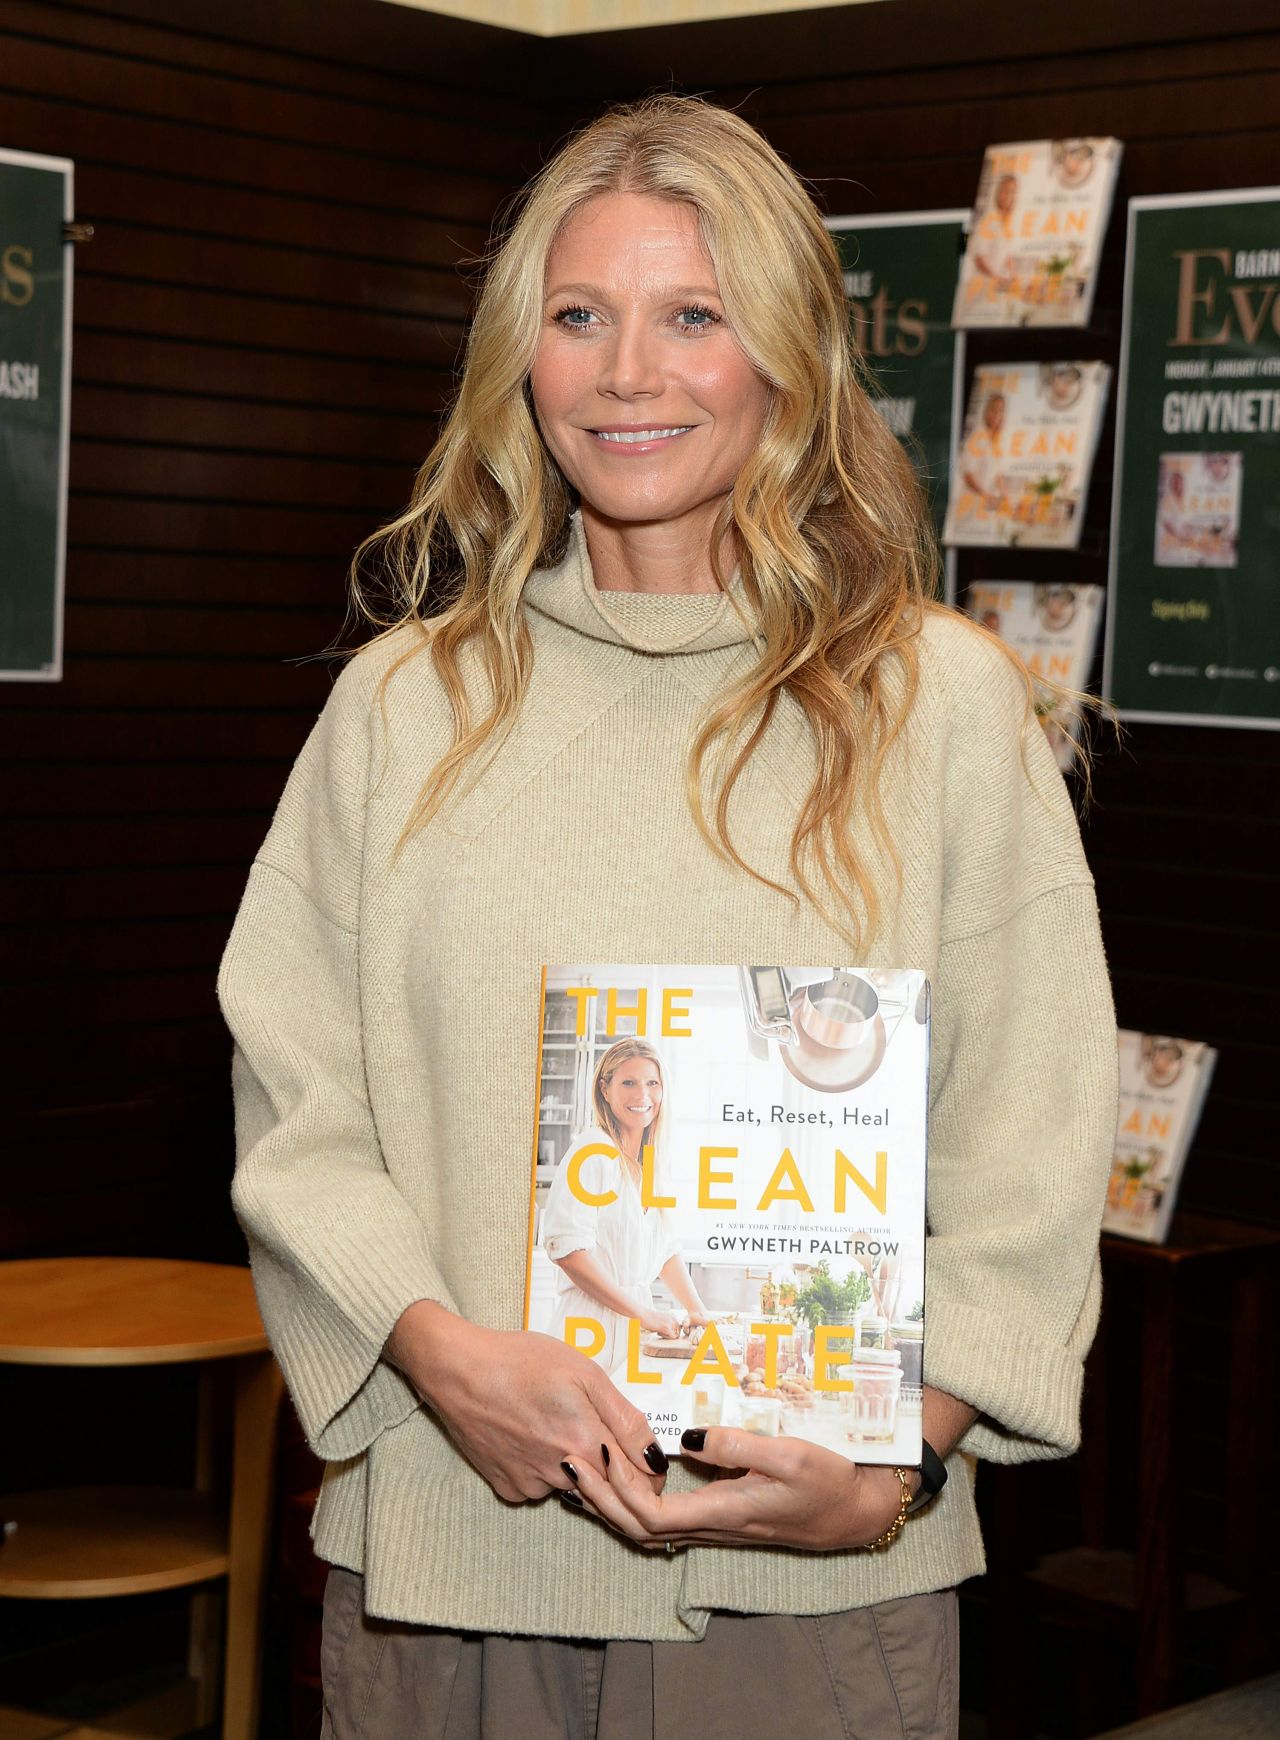 https://celebmafia.com/wp-content/uploads/2019/01/gwyneth-paltrow-the-clean-plate-eat-reset-heal-book-signing-in-la-01-14-2019-3.jpg